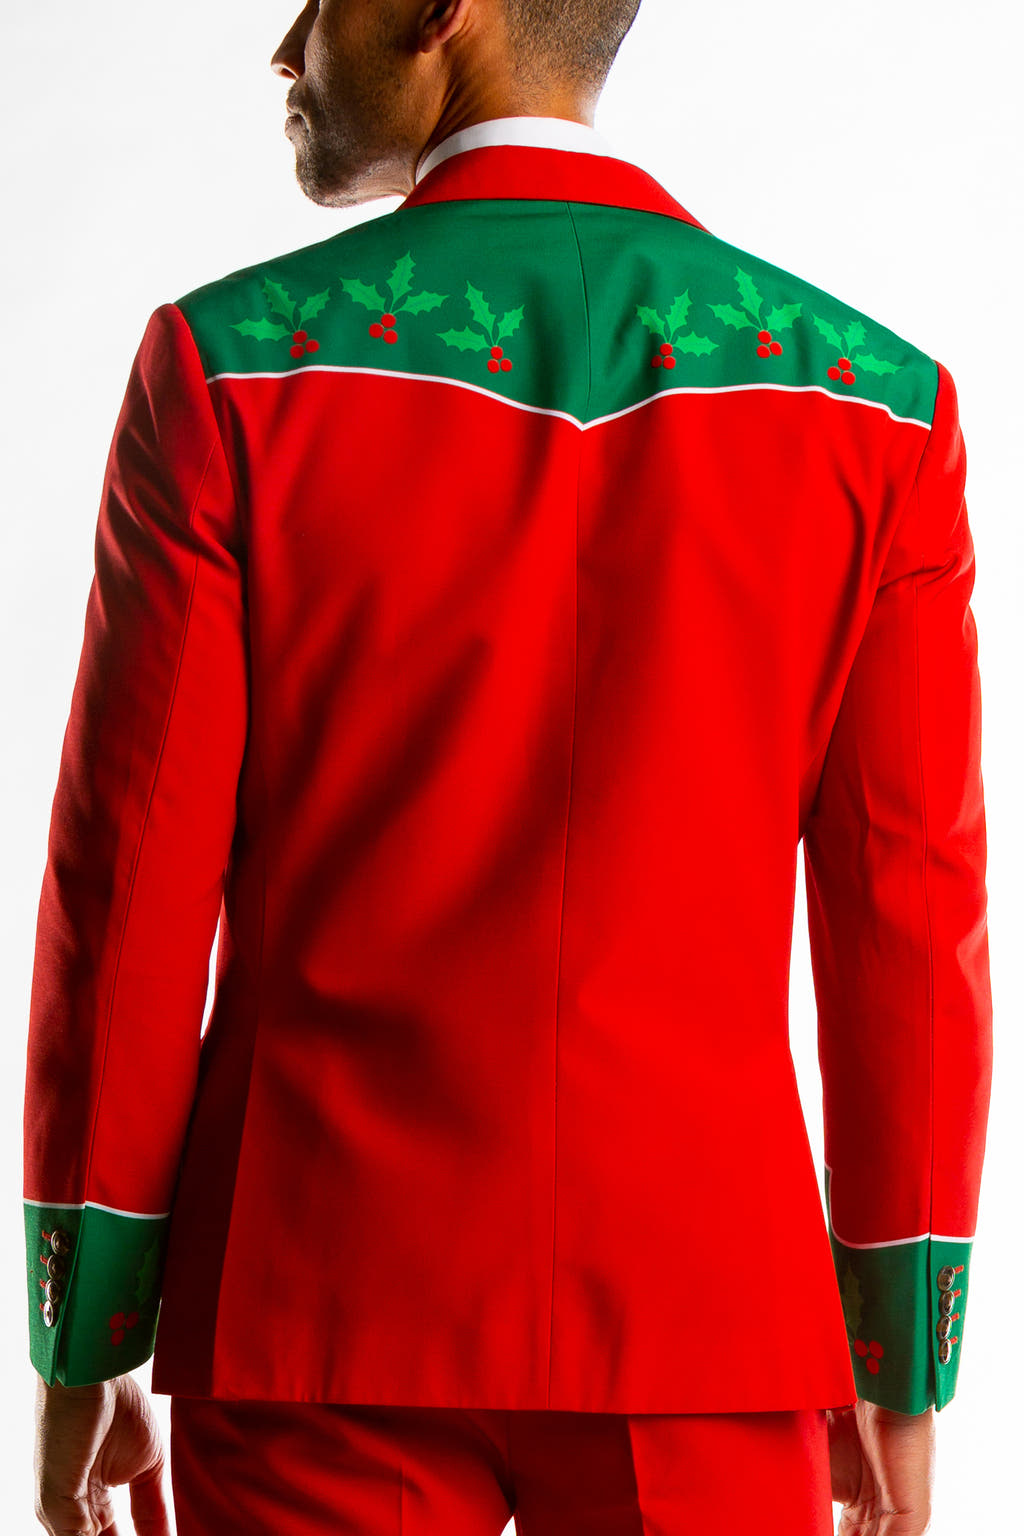 mens ugly christmas sweater suit